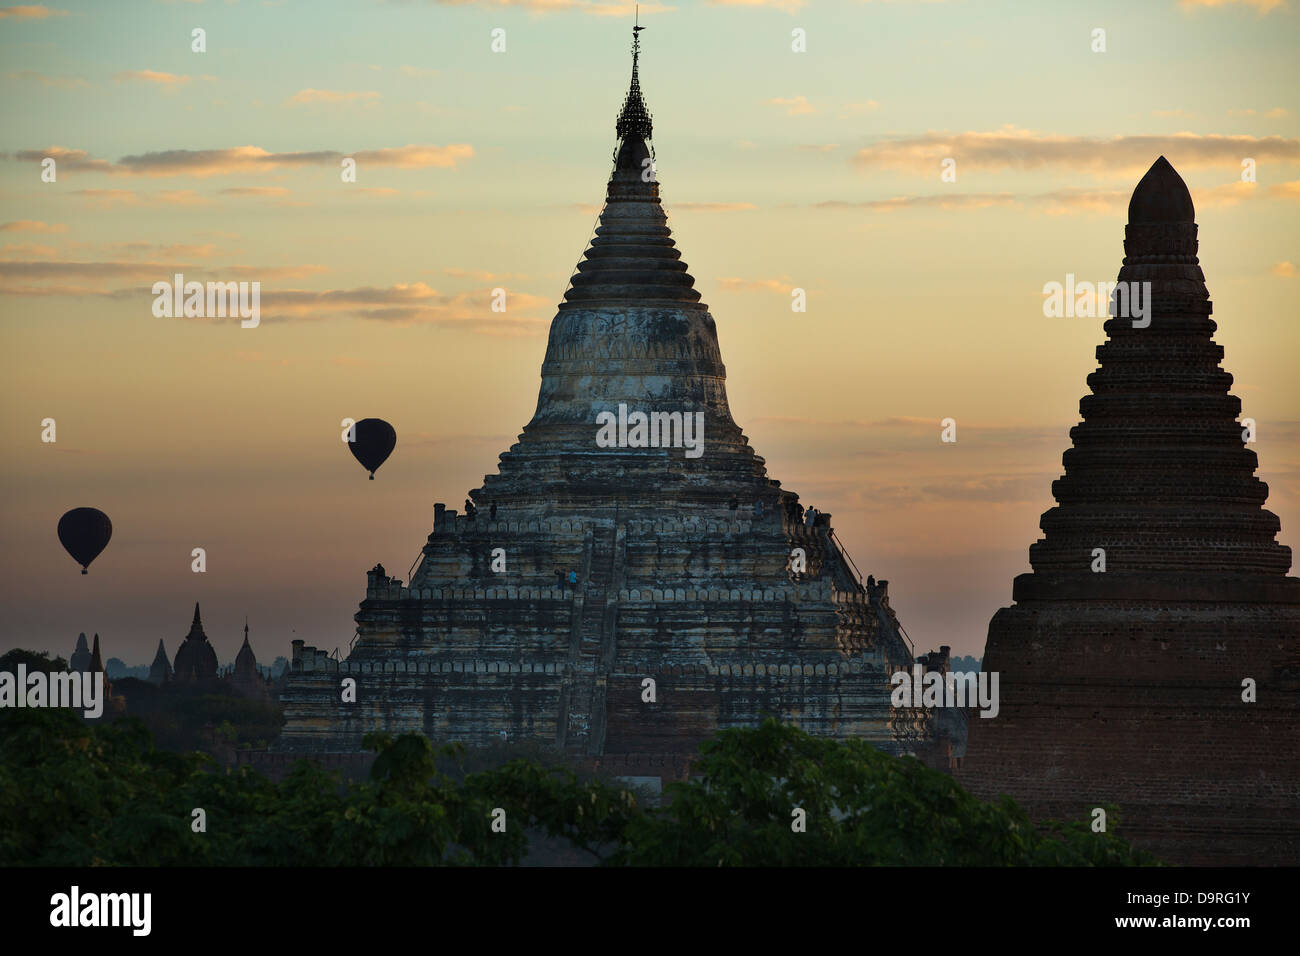 two baloons over the Temples of Bagan, Myanmar (Burma) Stock Photo